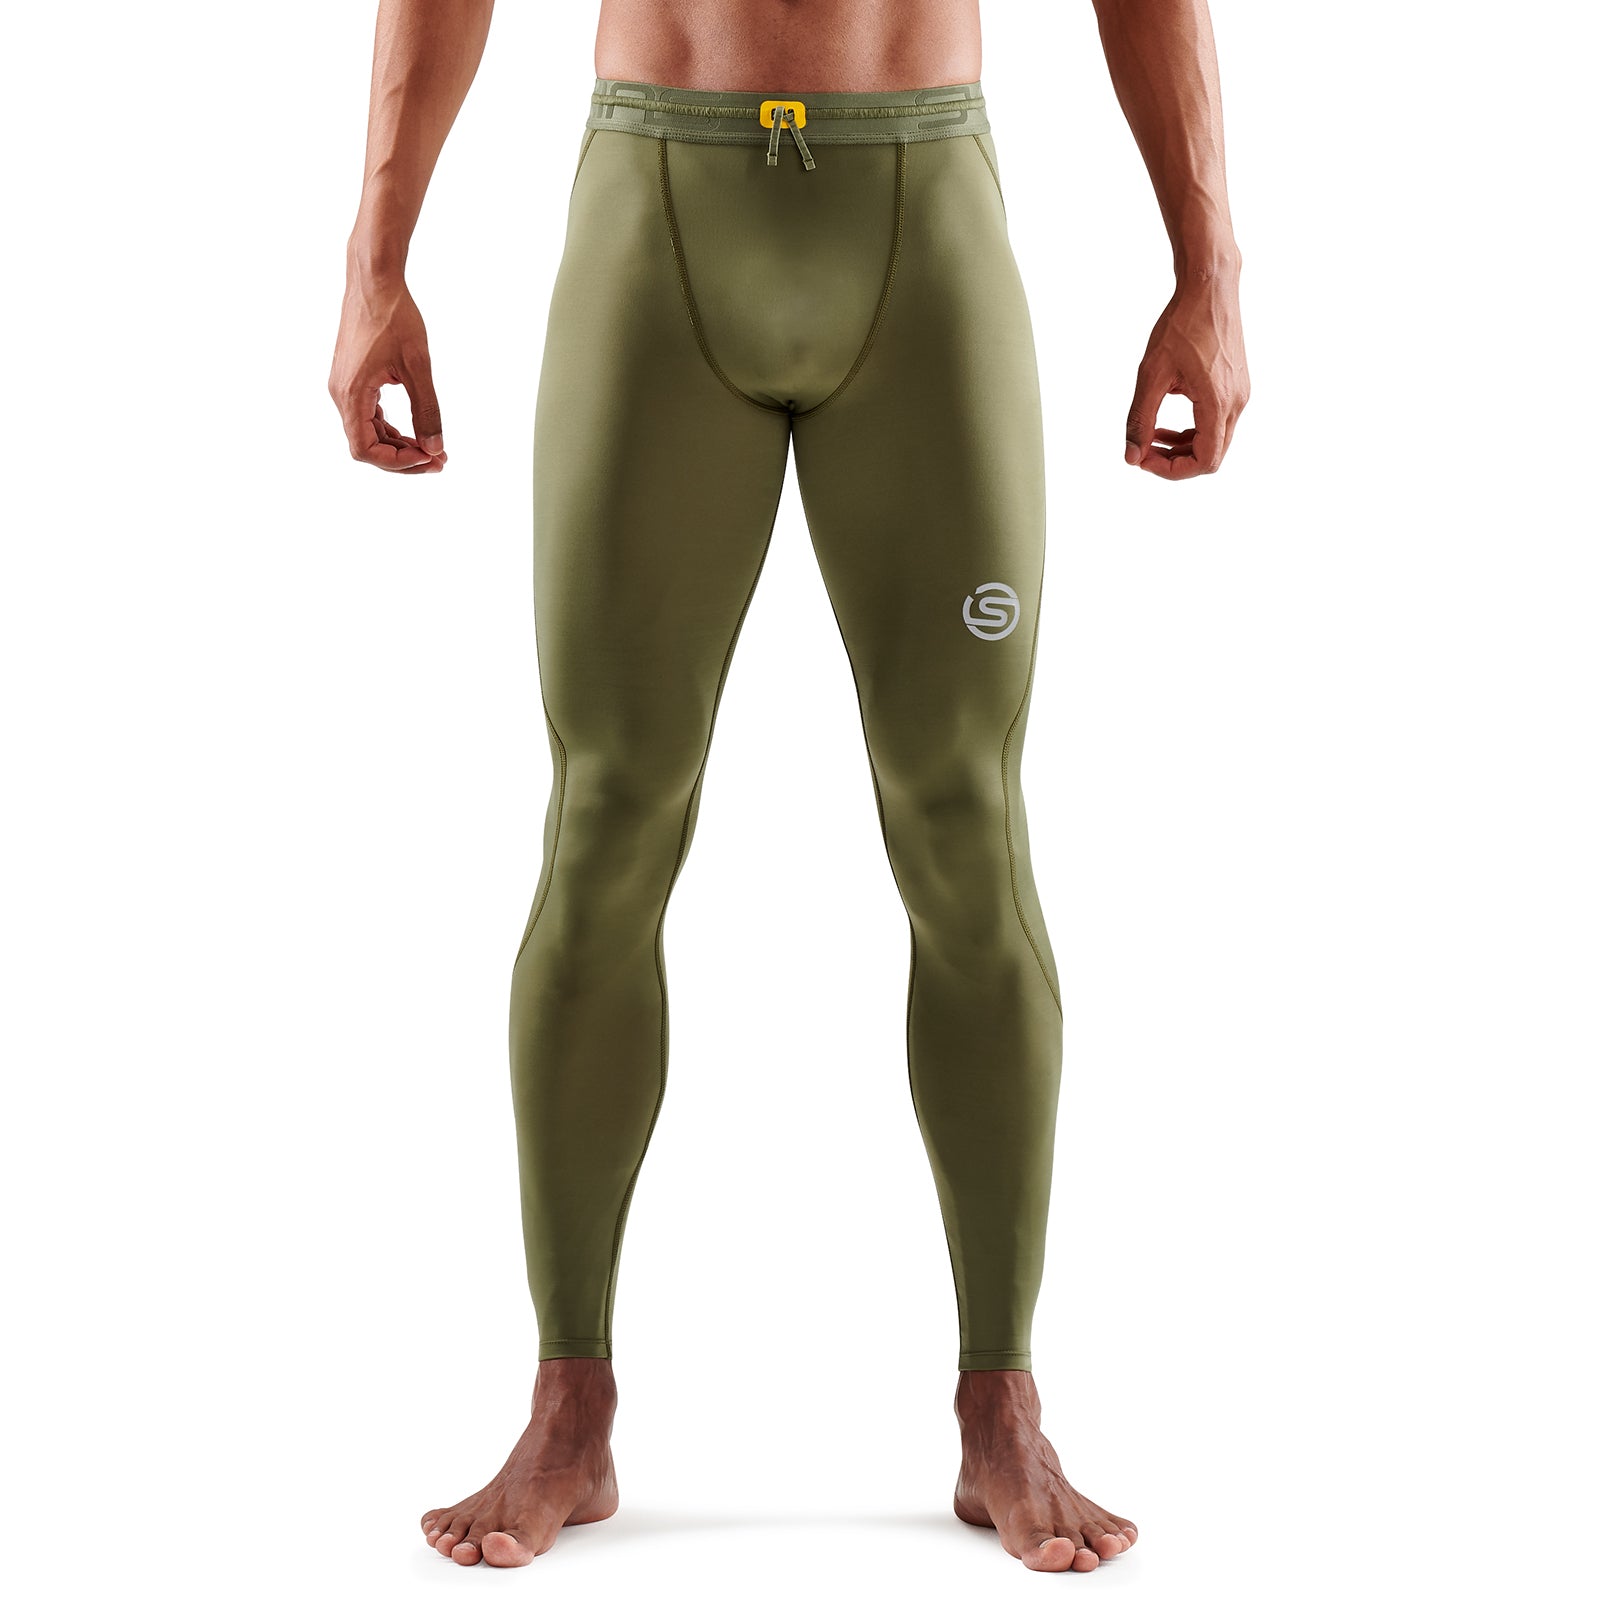 Mens Recovery Skins Full Tights - Sutton Runner